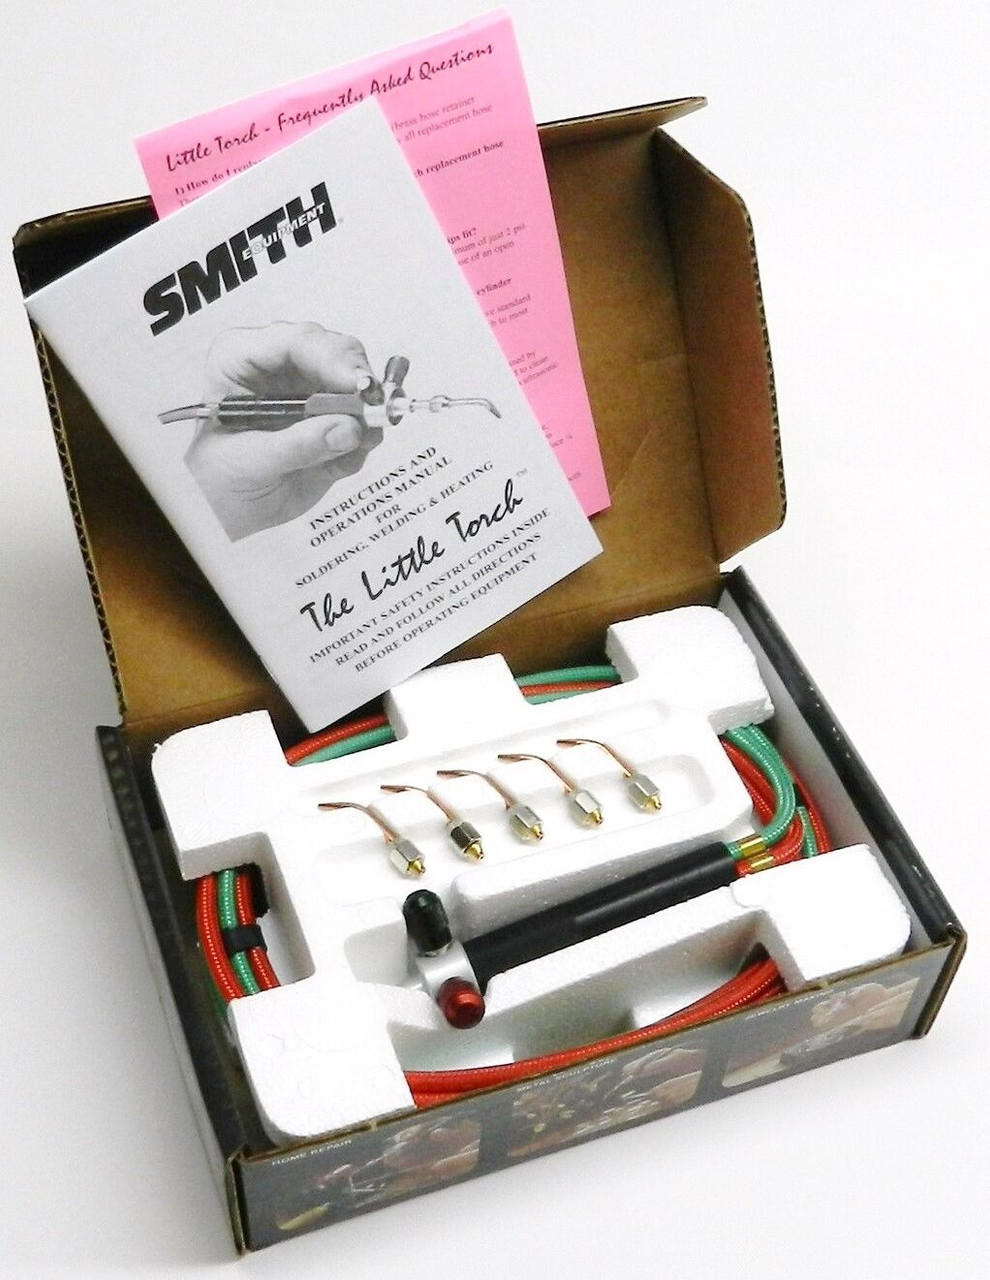 Smith Little Torch 239-048A European Fitting Torch Outfit 5 Tip for Europ